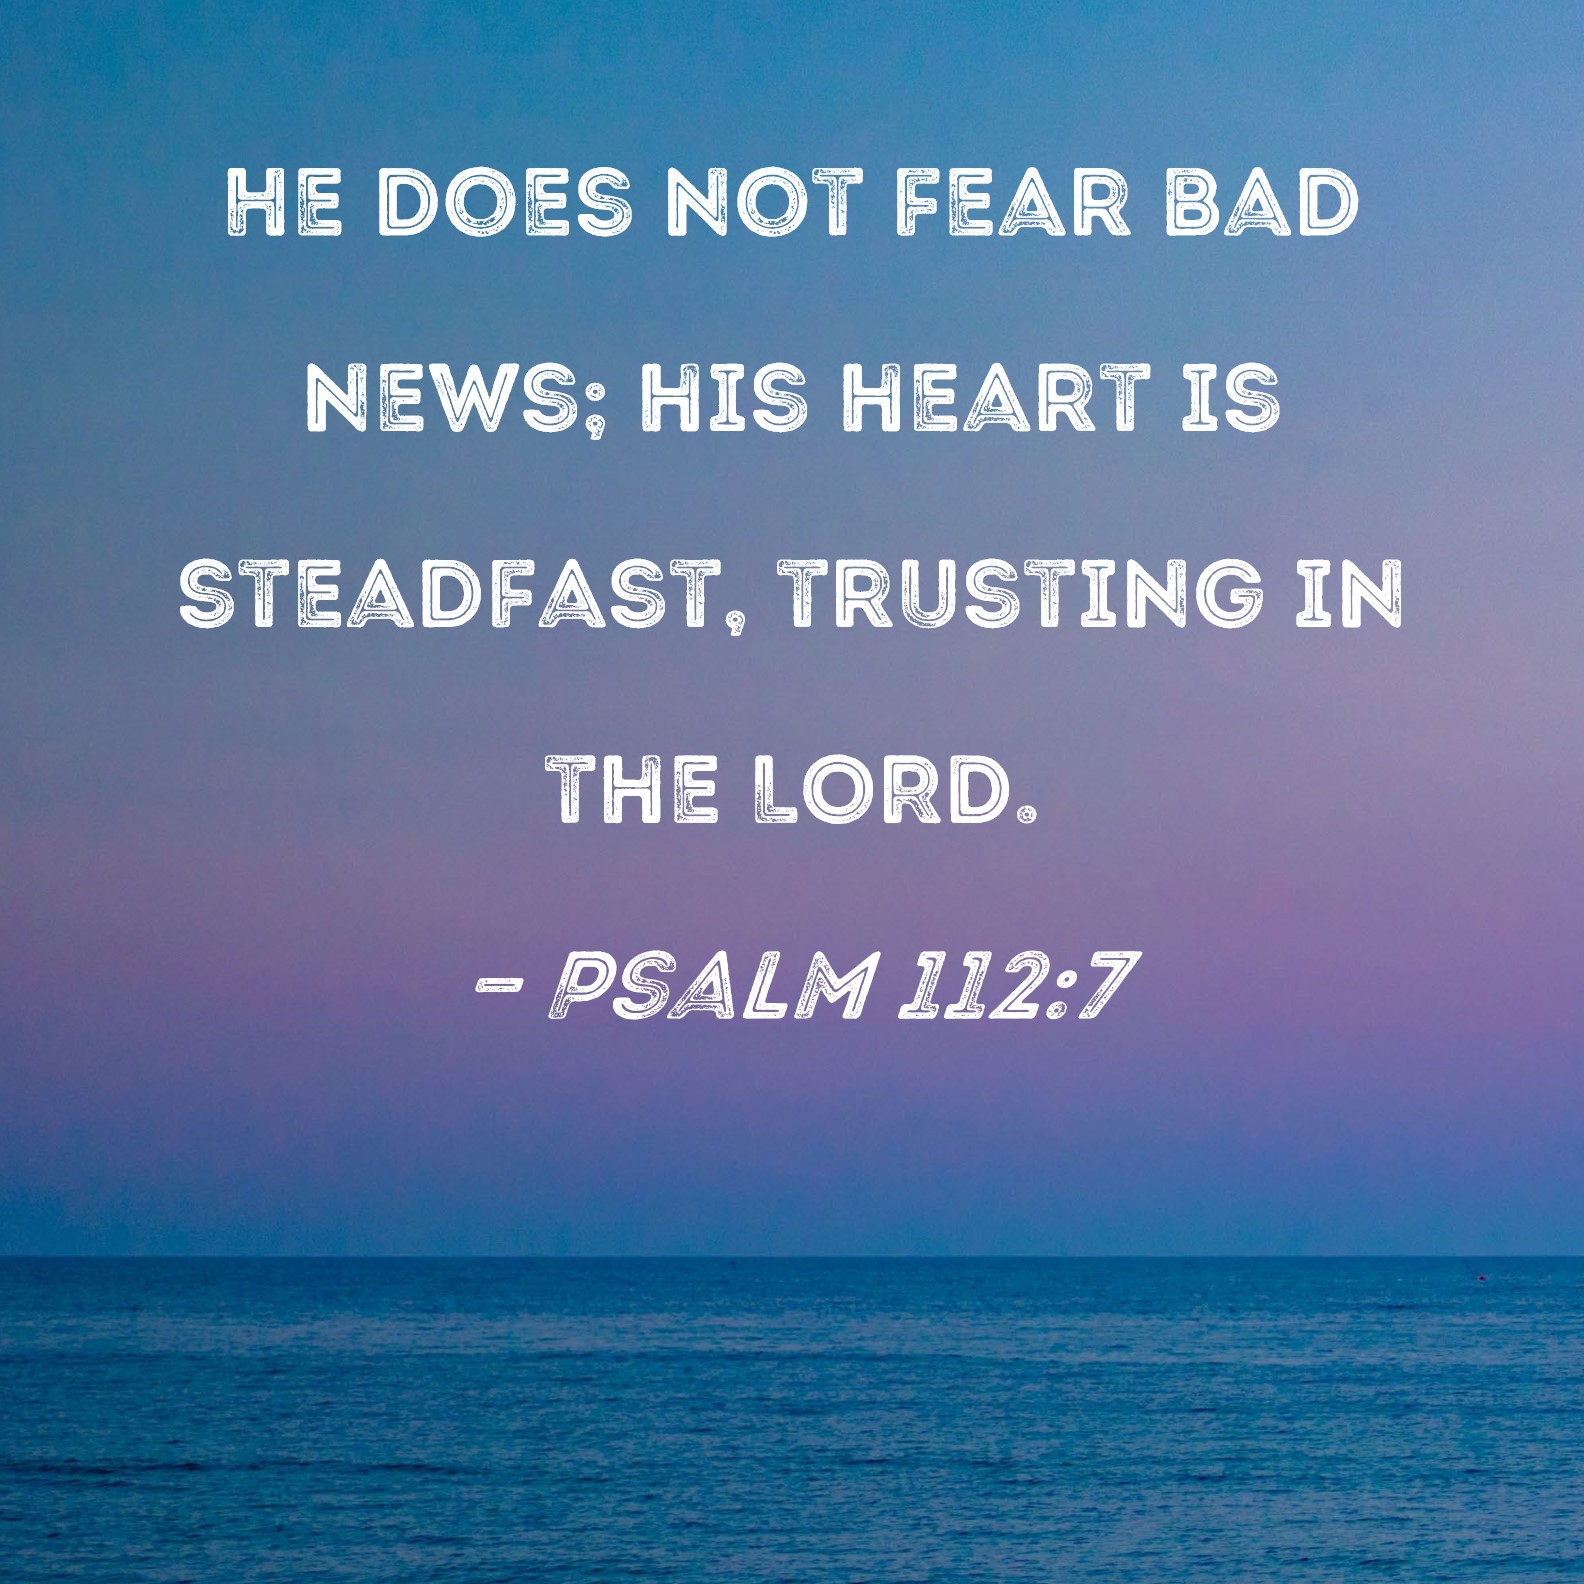 GOD WITH US - The Lord is on my side, I will not fear.